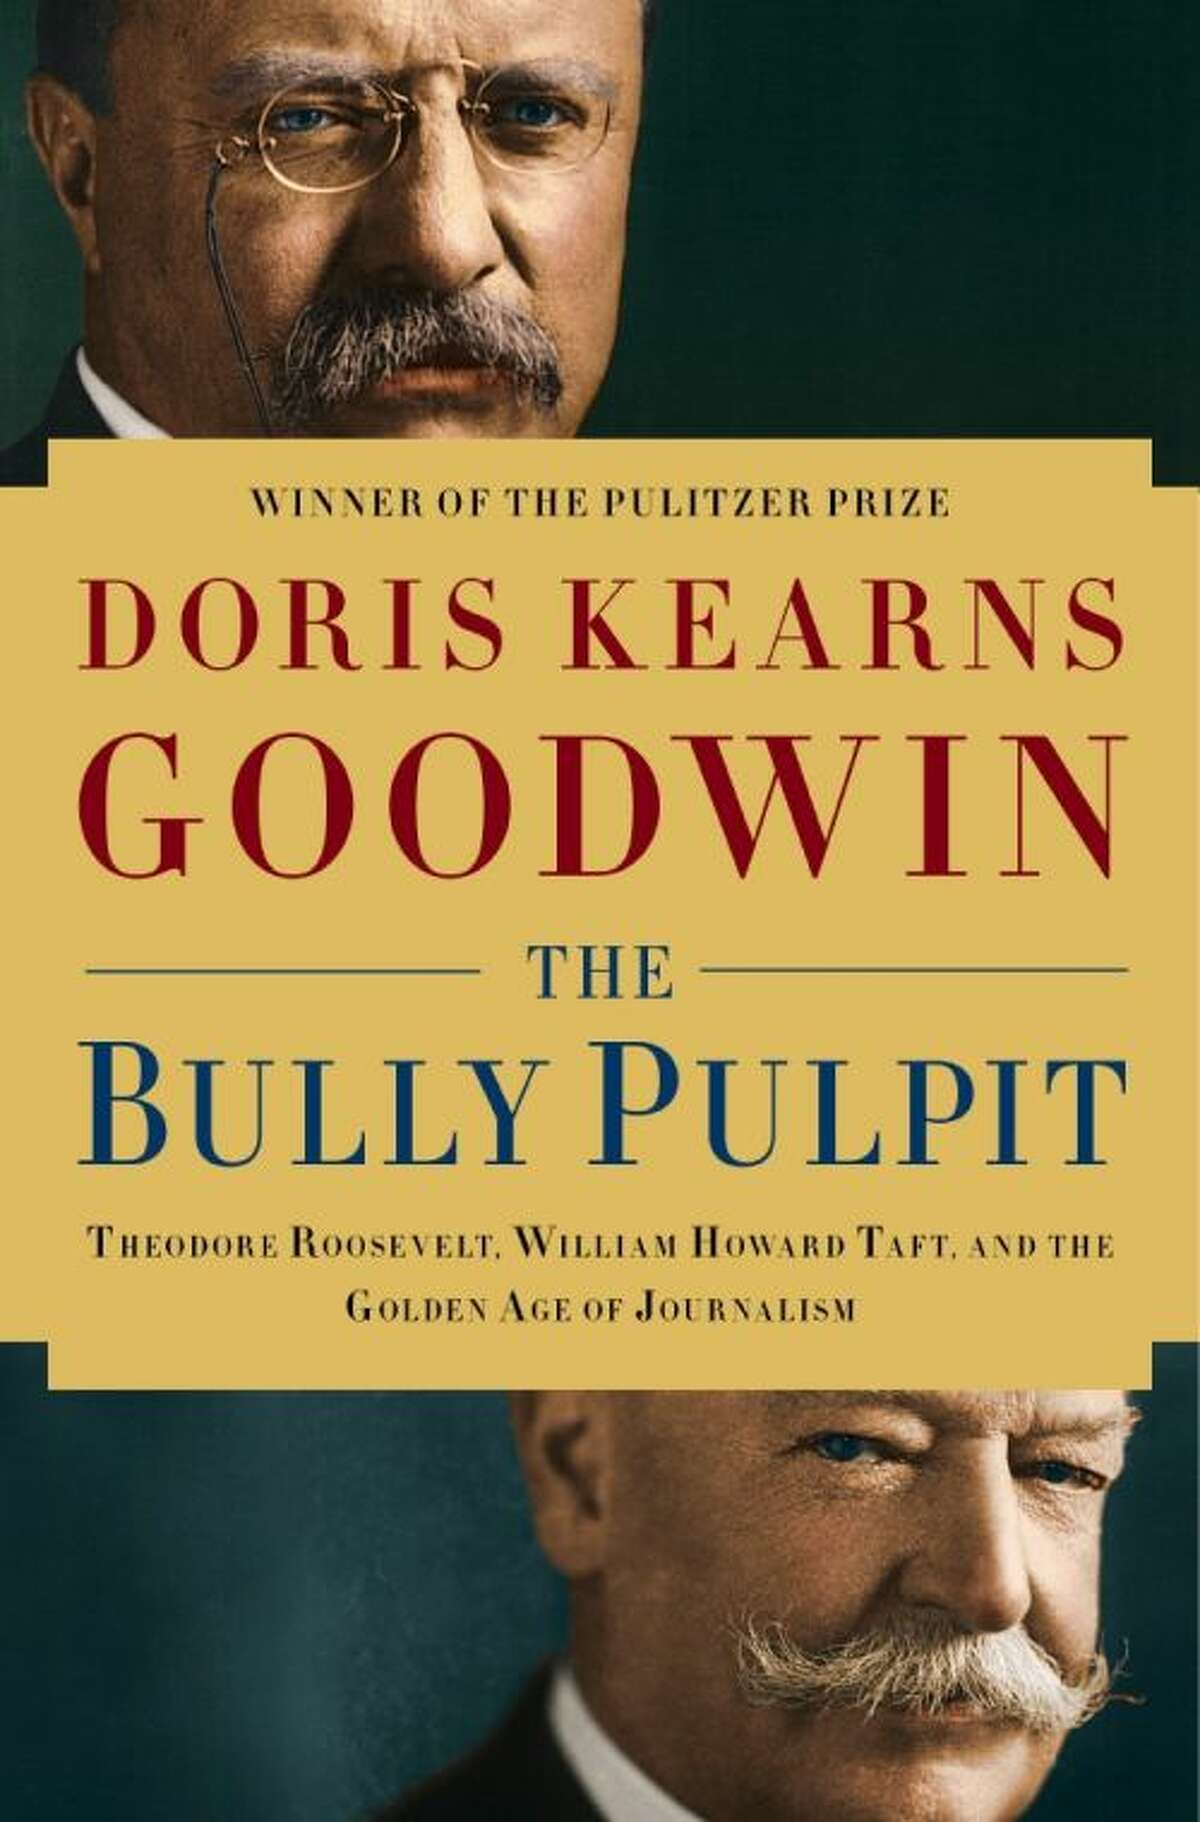 This book cover image released by Simon & Schuster shows "The Bully Pulpit: Theodore Roosevelt, William Howard Taft, and the Golden Age of Journalism," by Doris Kearns Goodwin. (AP Photo/Simon & Schuster)